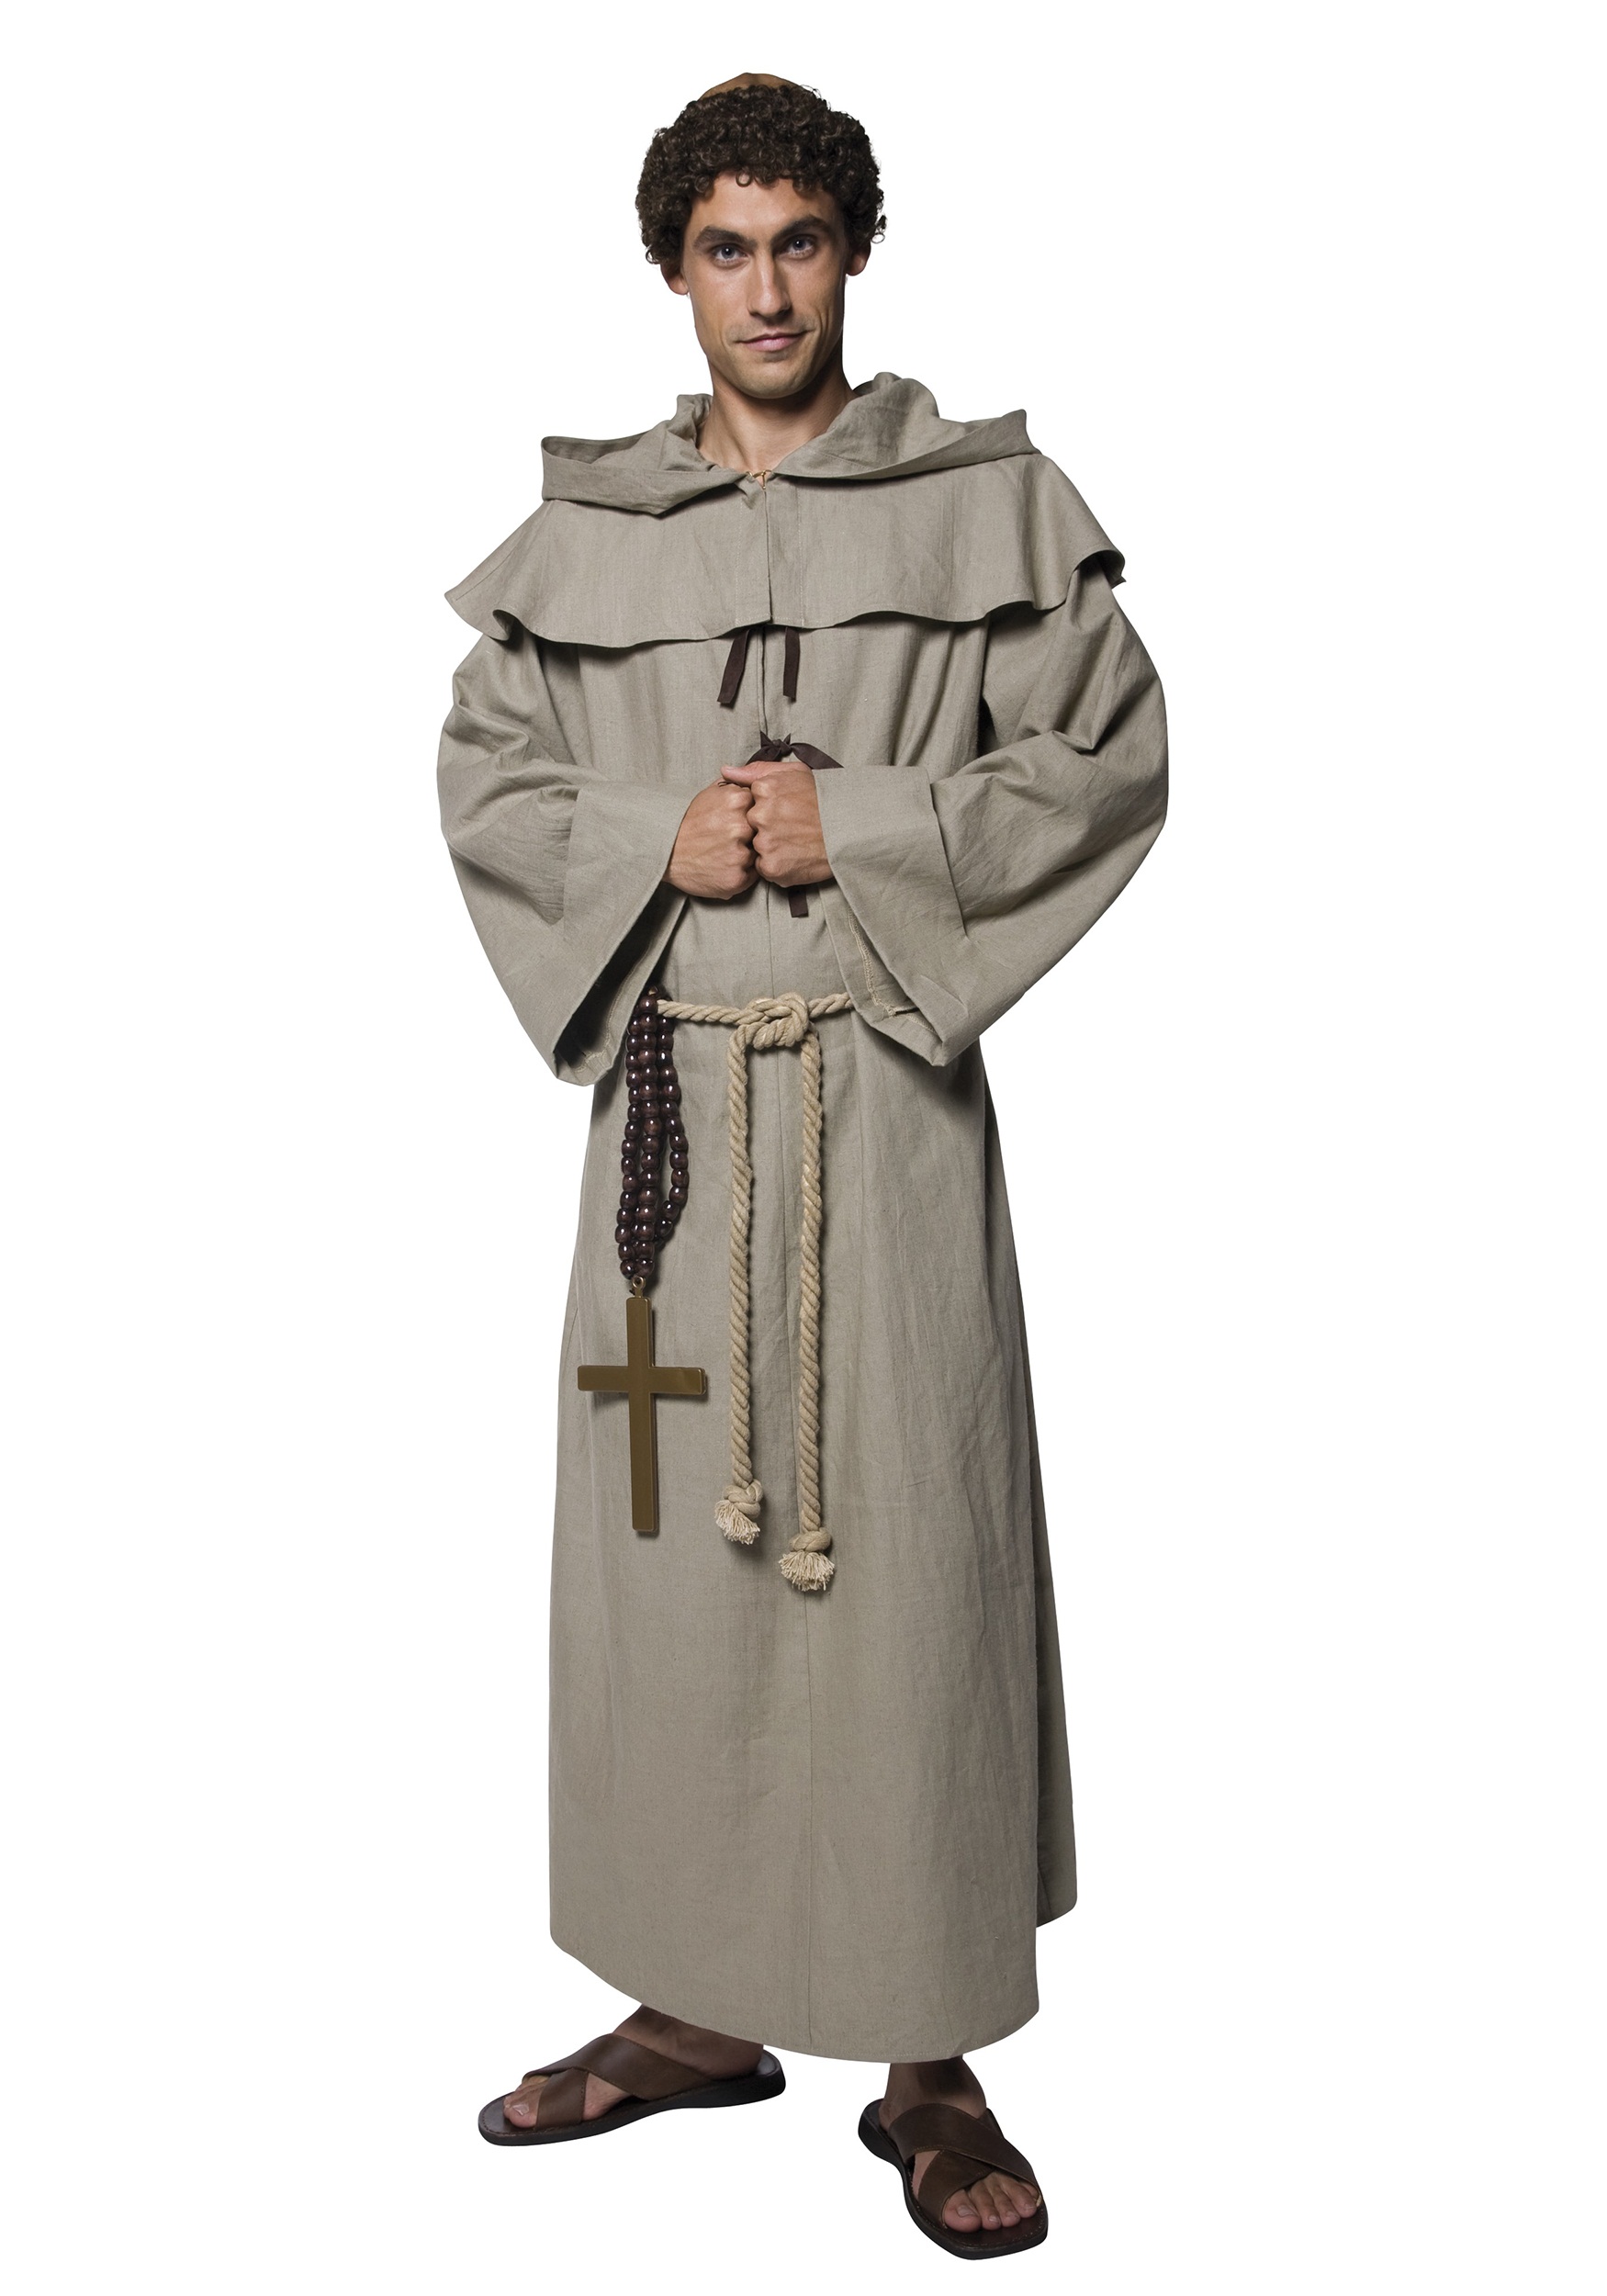 Friar Tuck Costume Mens Monk Fancy Dress Outfit & Wig Religious Halloween Outfit 